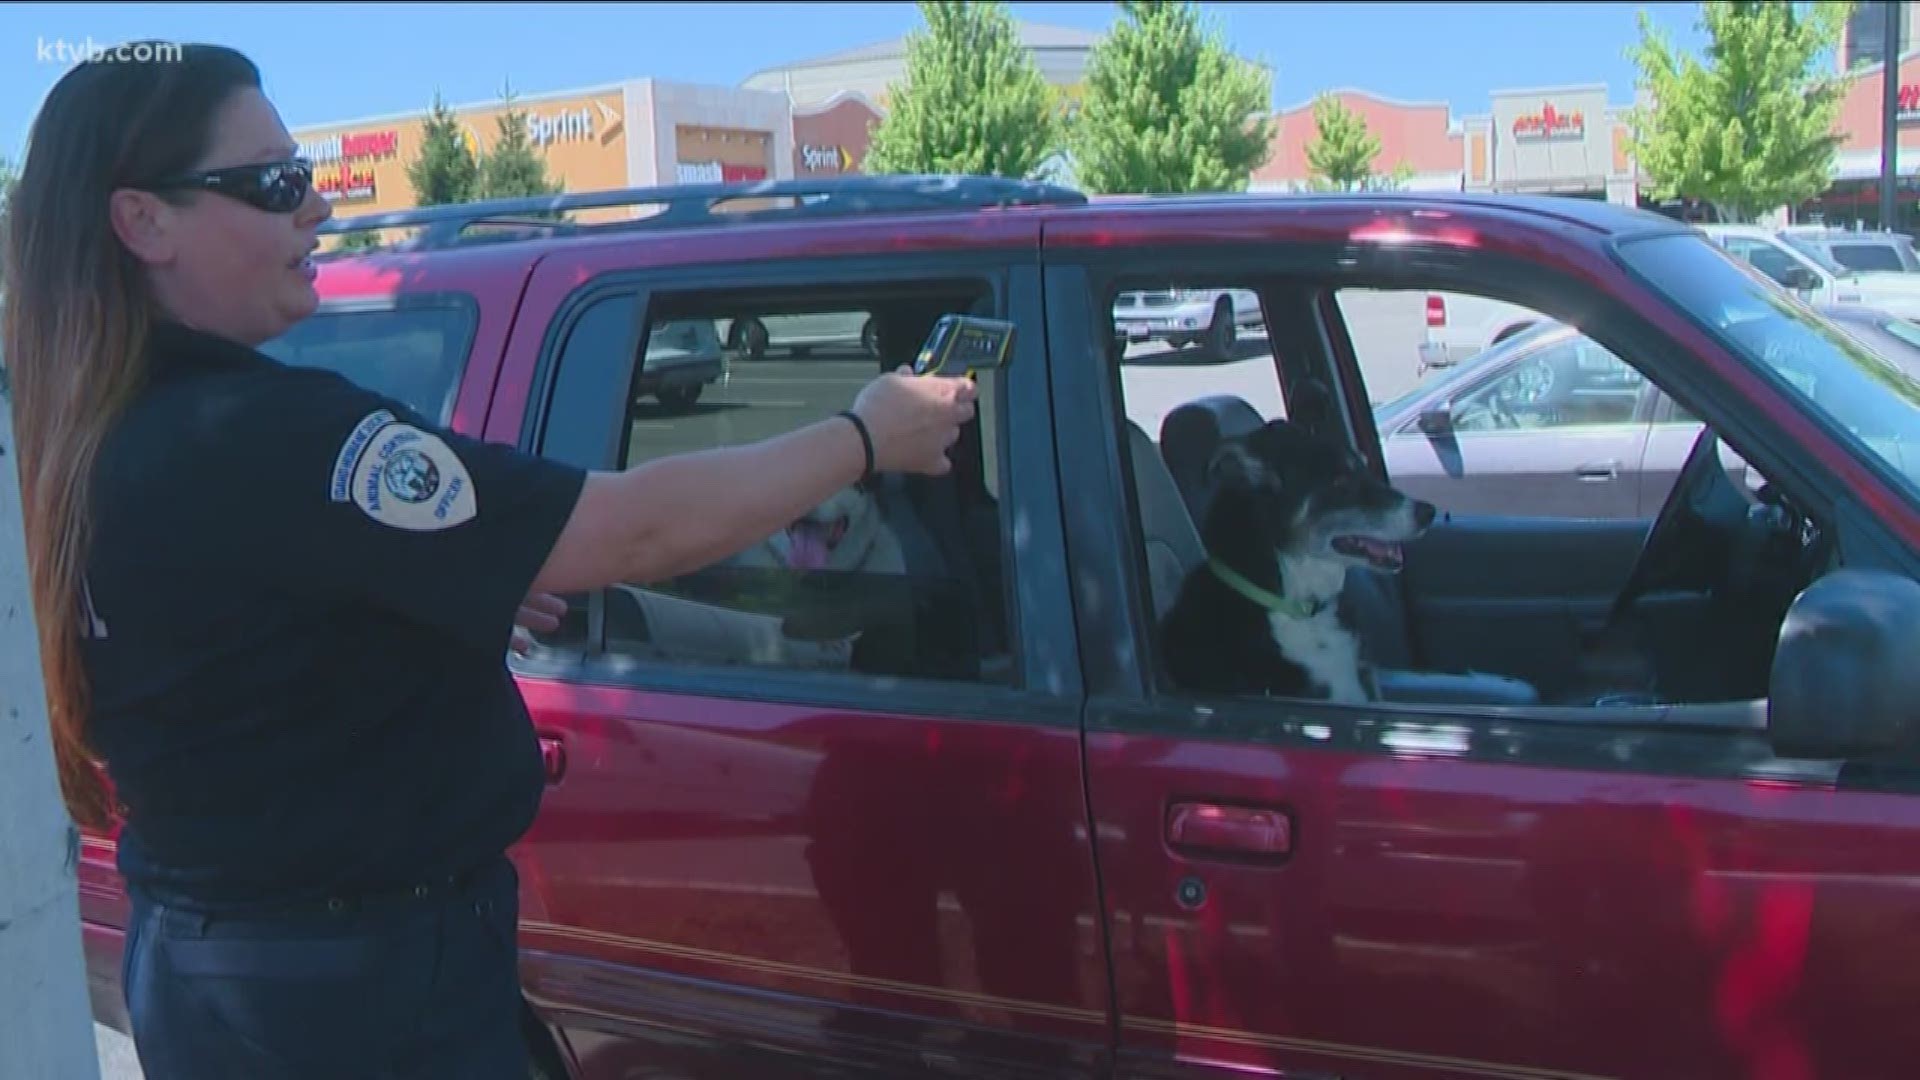 KTVB went out with Animal Control officers Monday to rescue dogs lefts in vehicles.